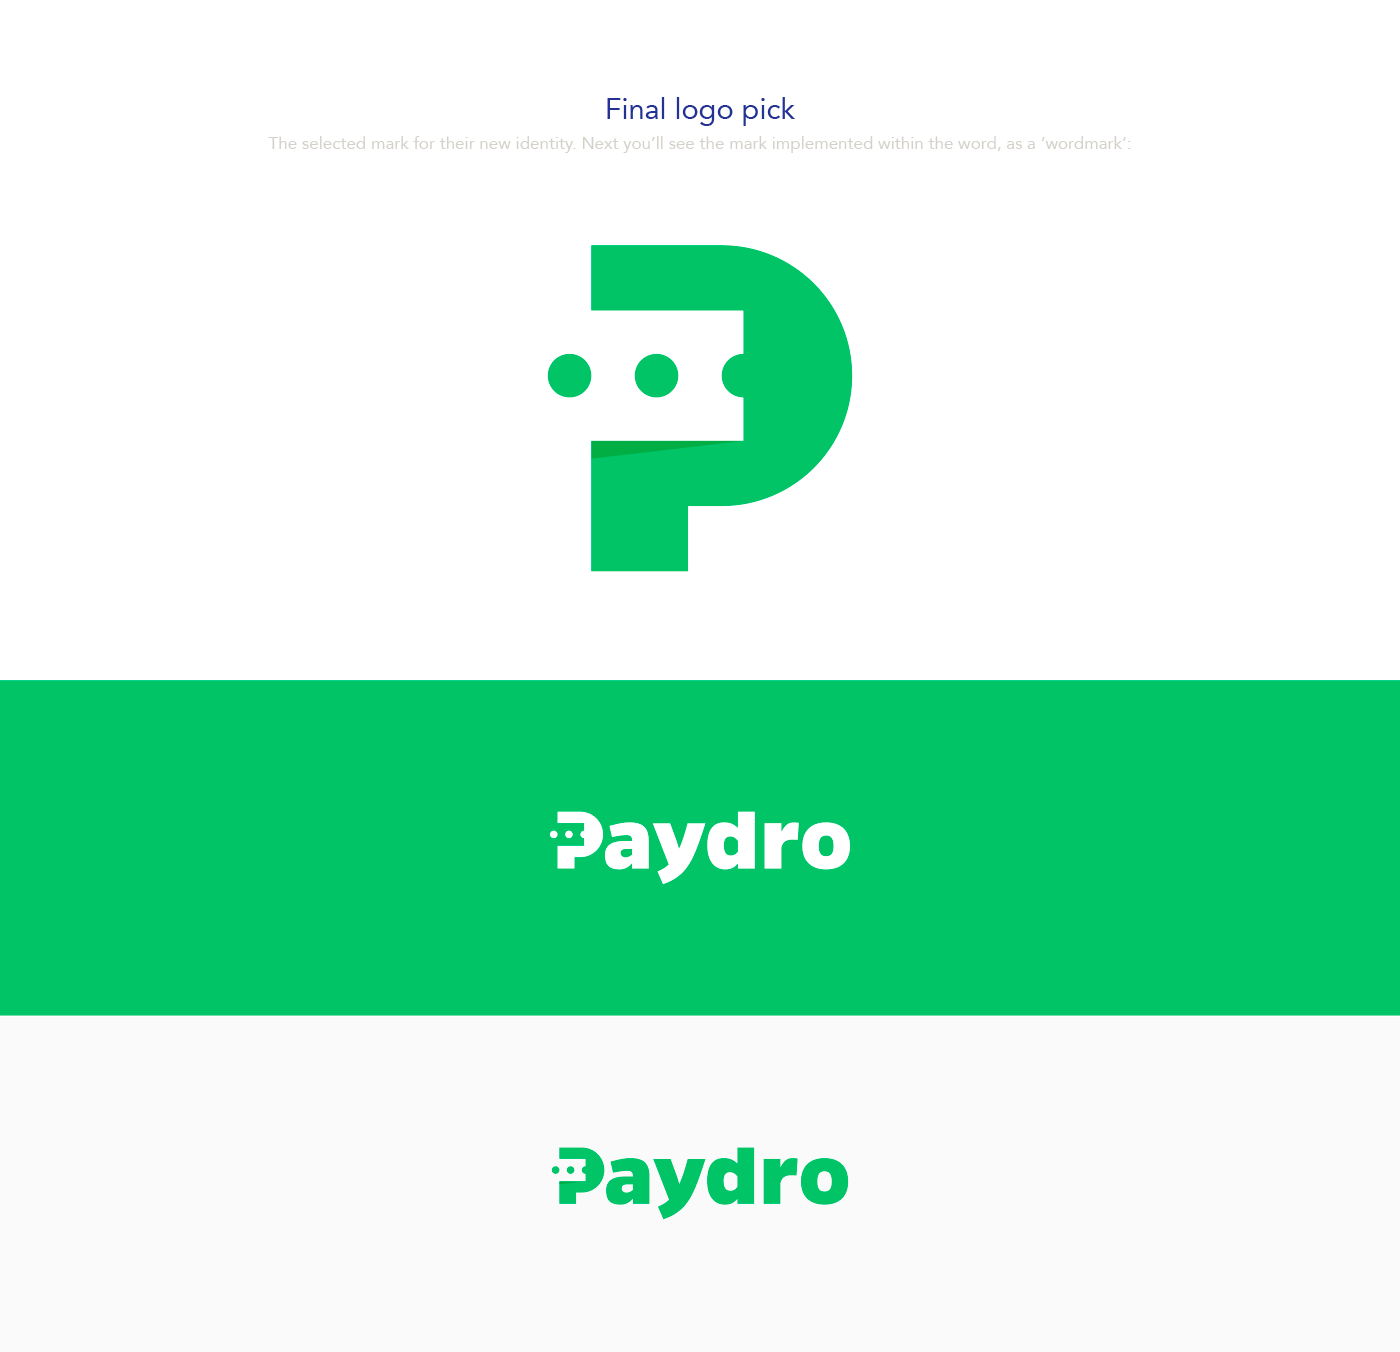 Pay paydro ticket Event Events network social payment online organise sell tools logo rebranding identity